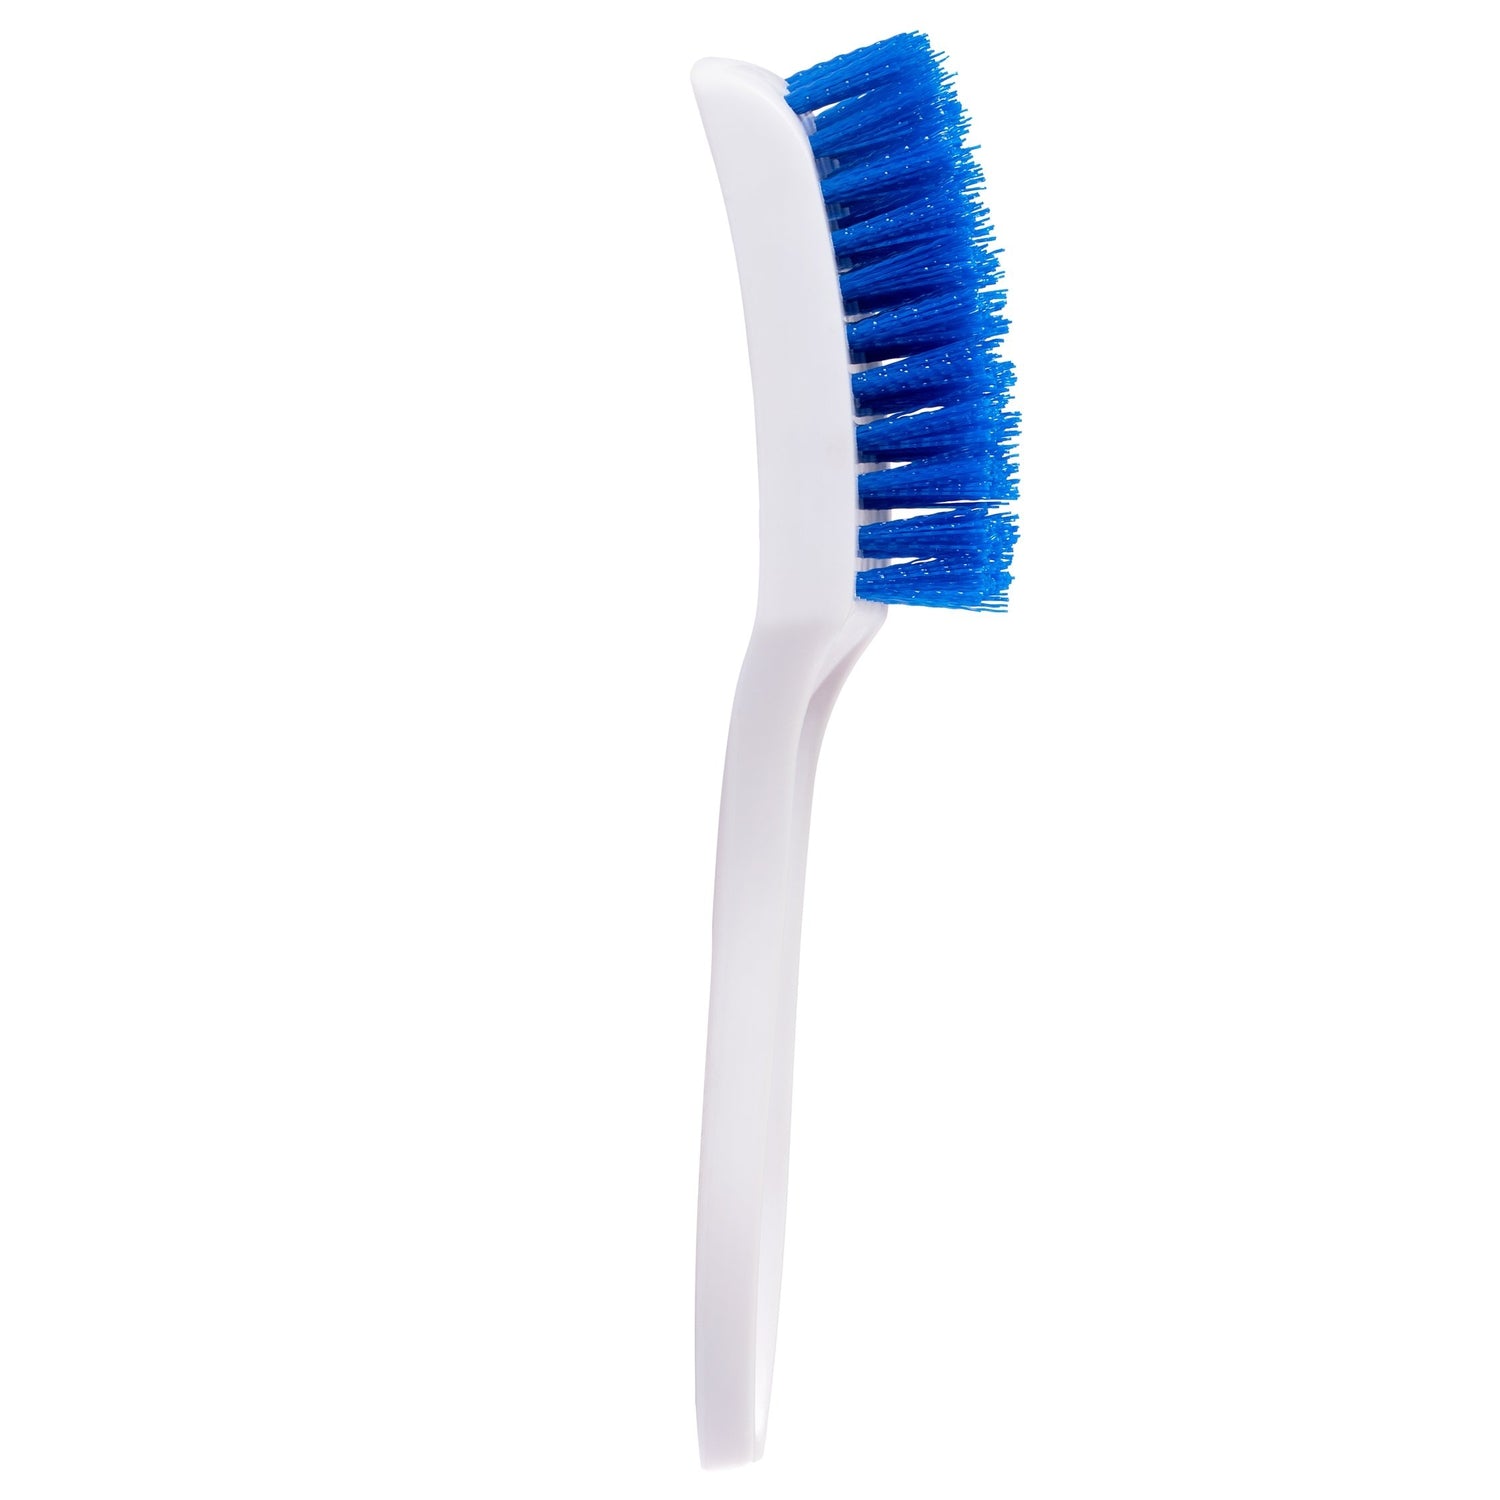 7 x 1 Heavy-Duty Parts Cleaning Brush - Kimball Midwest